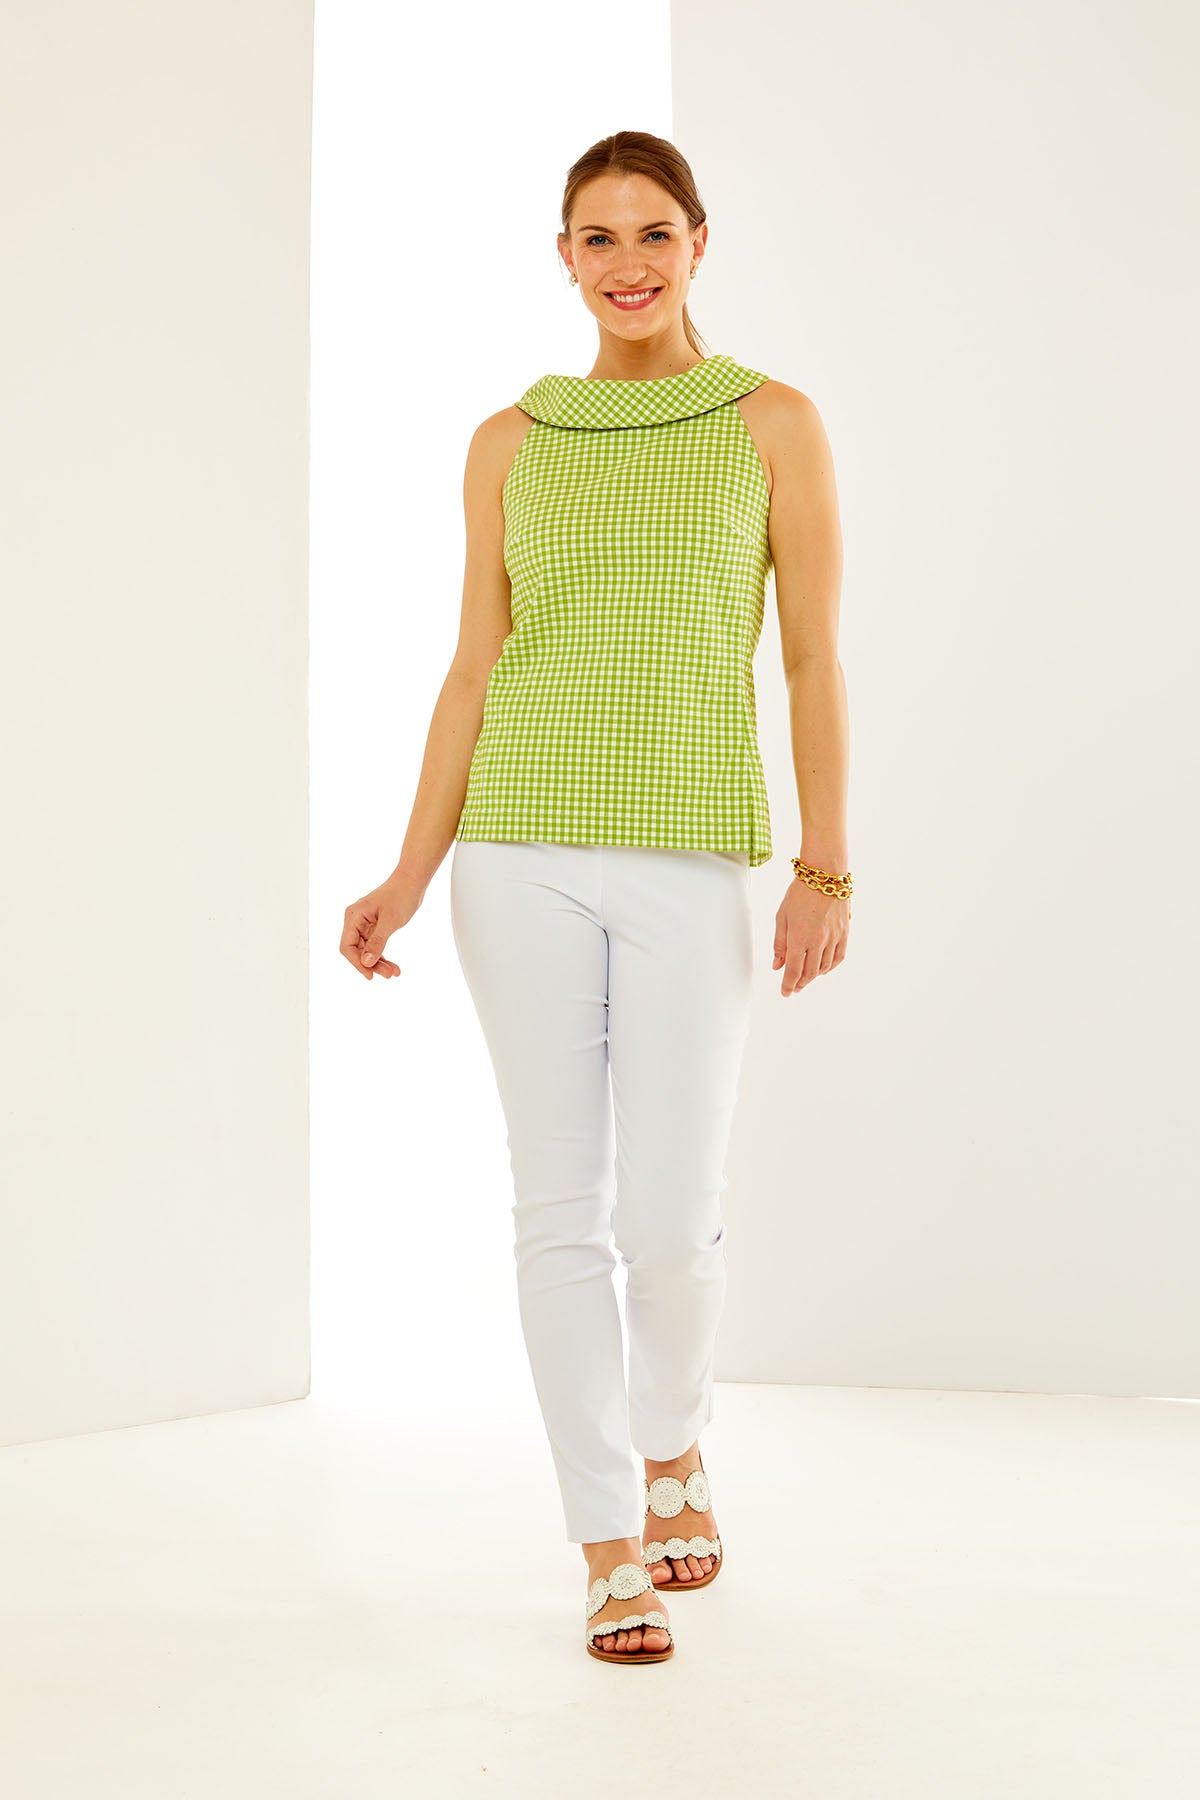 Woman in green and white gingham top